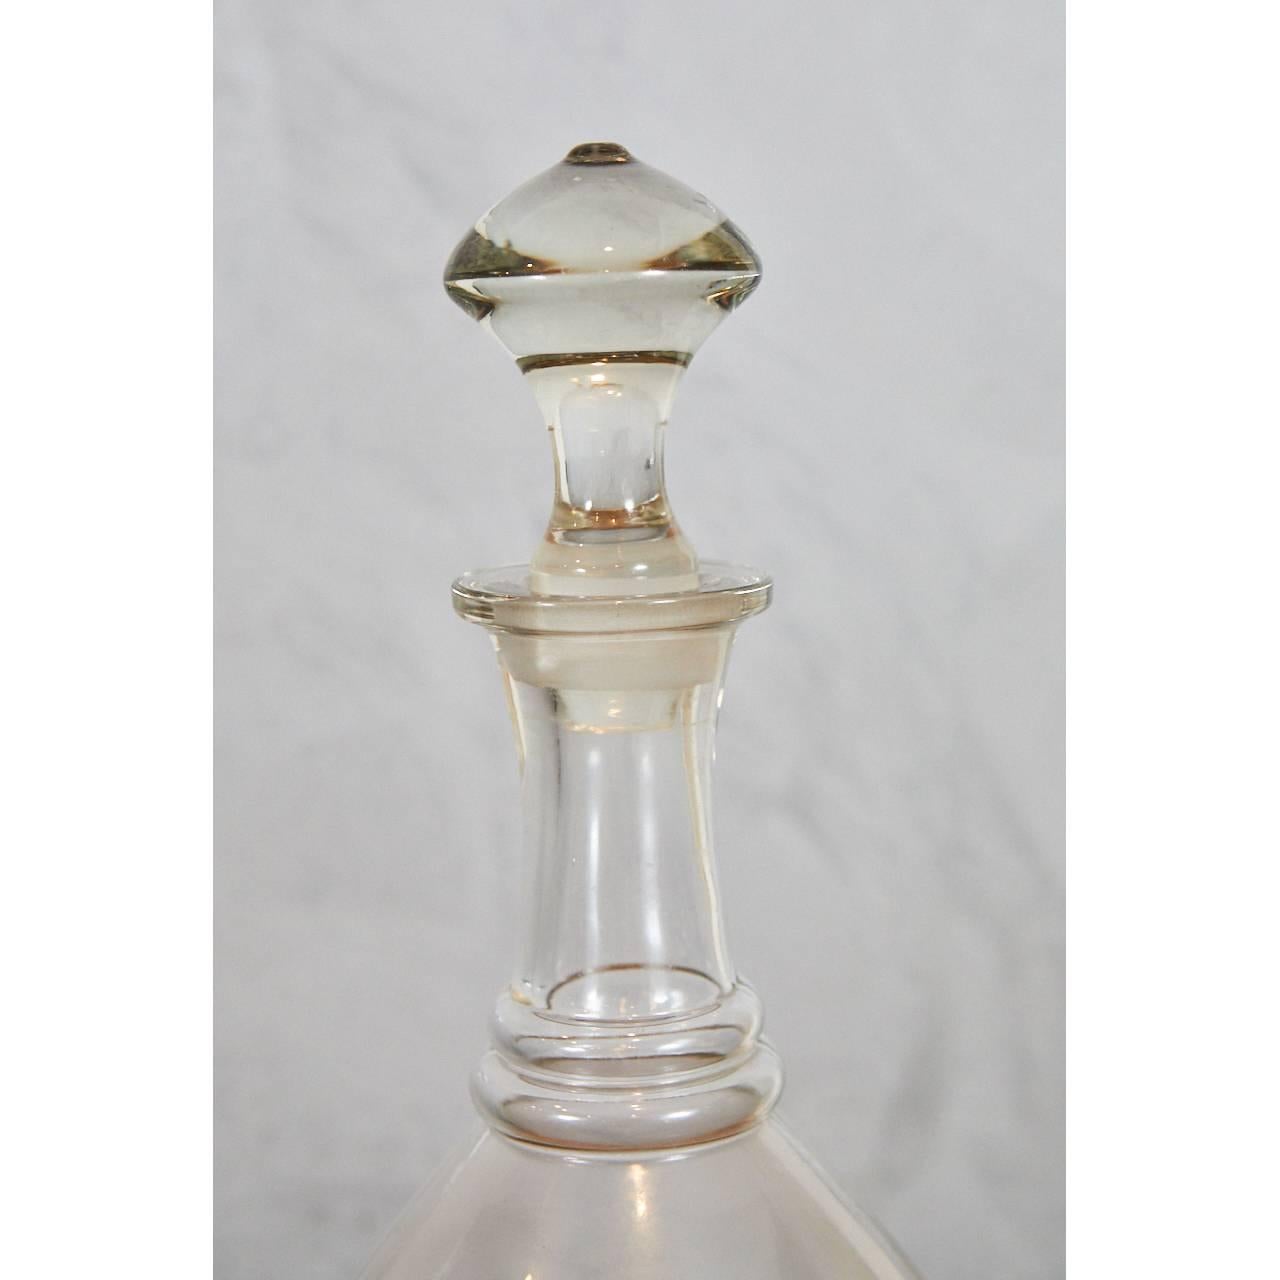 This exquisite glass apothecary bottle has a separate base and bottle that fit snugly together. The beautifully stopper measures 4.5